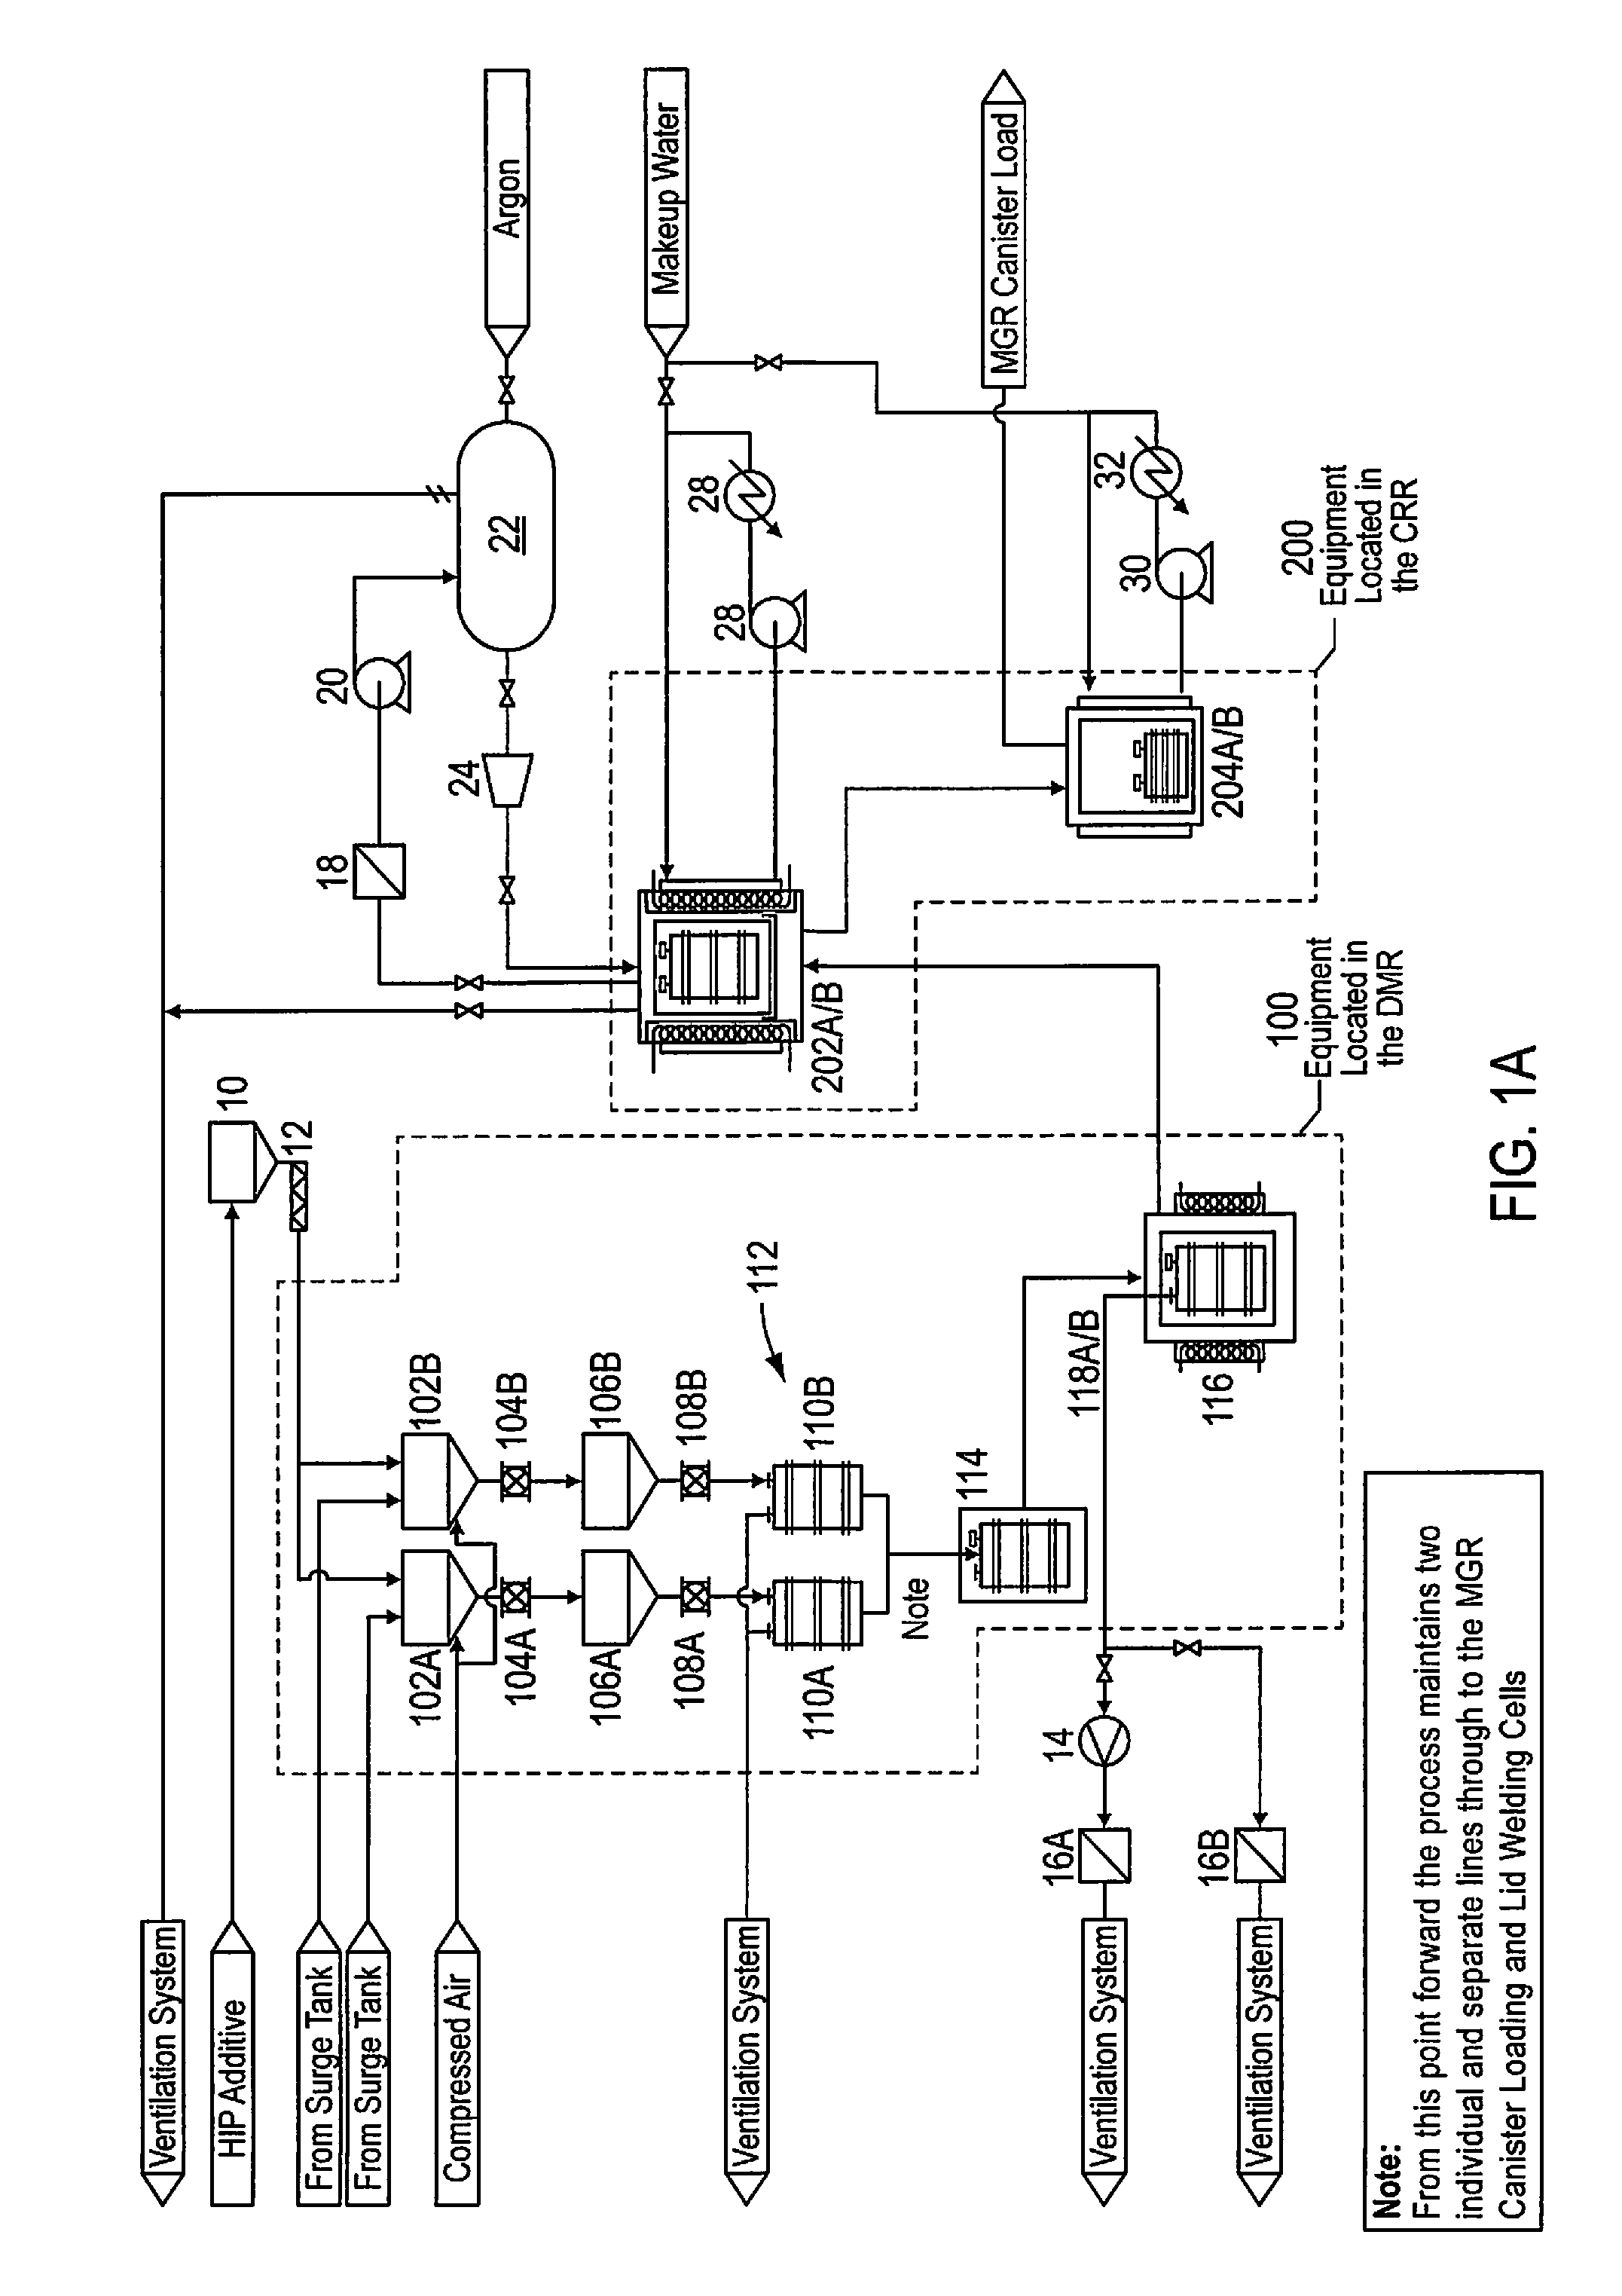 Methods of consolidating radioactive containing materials by hot isostatic pressing